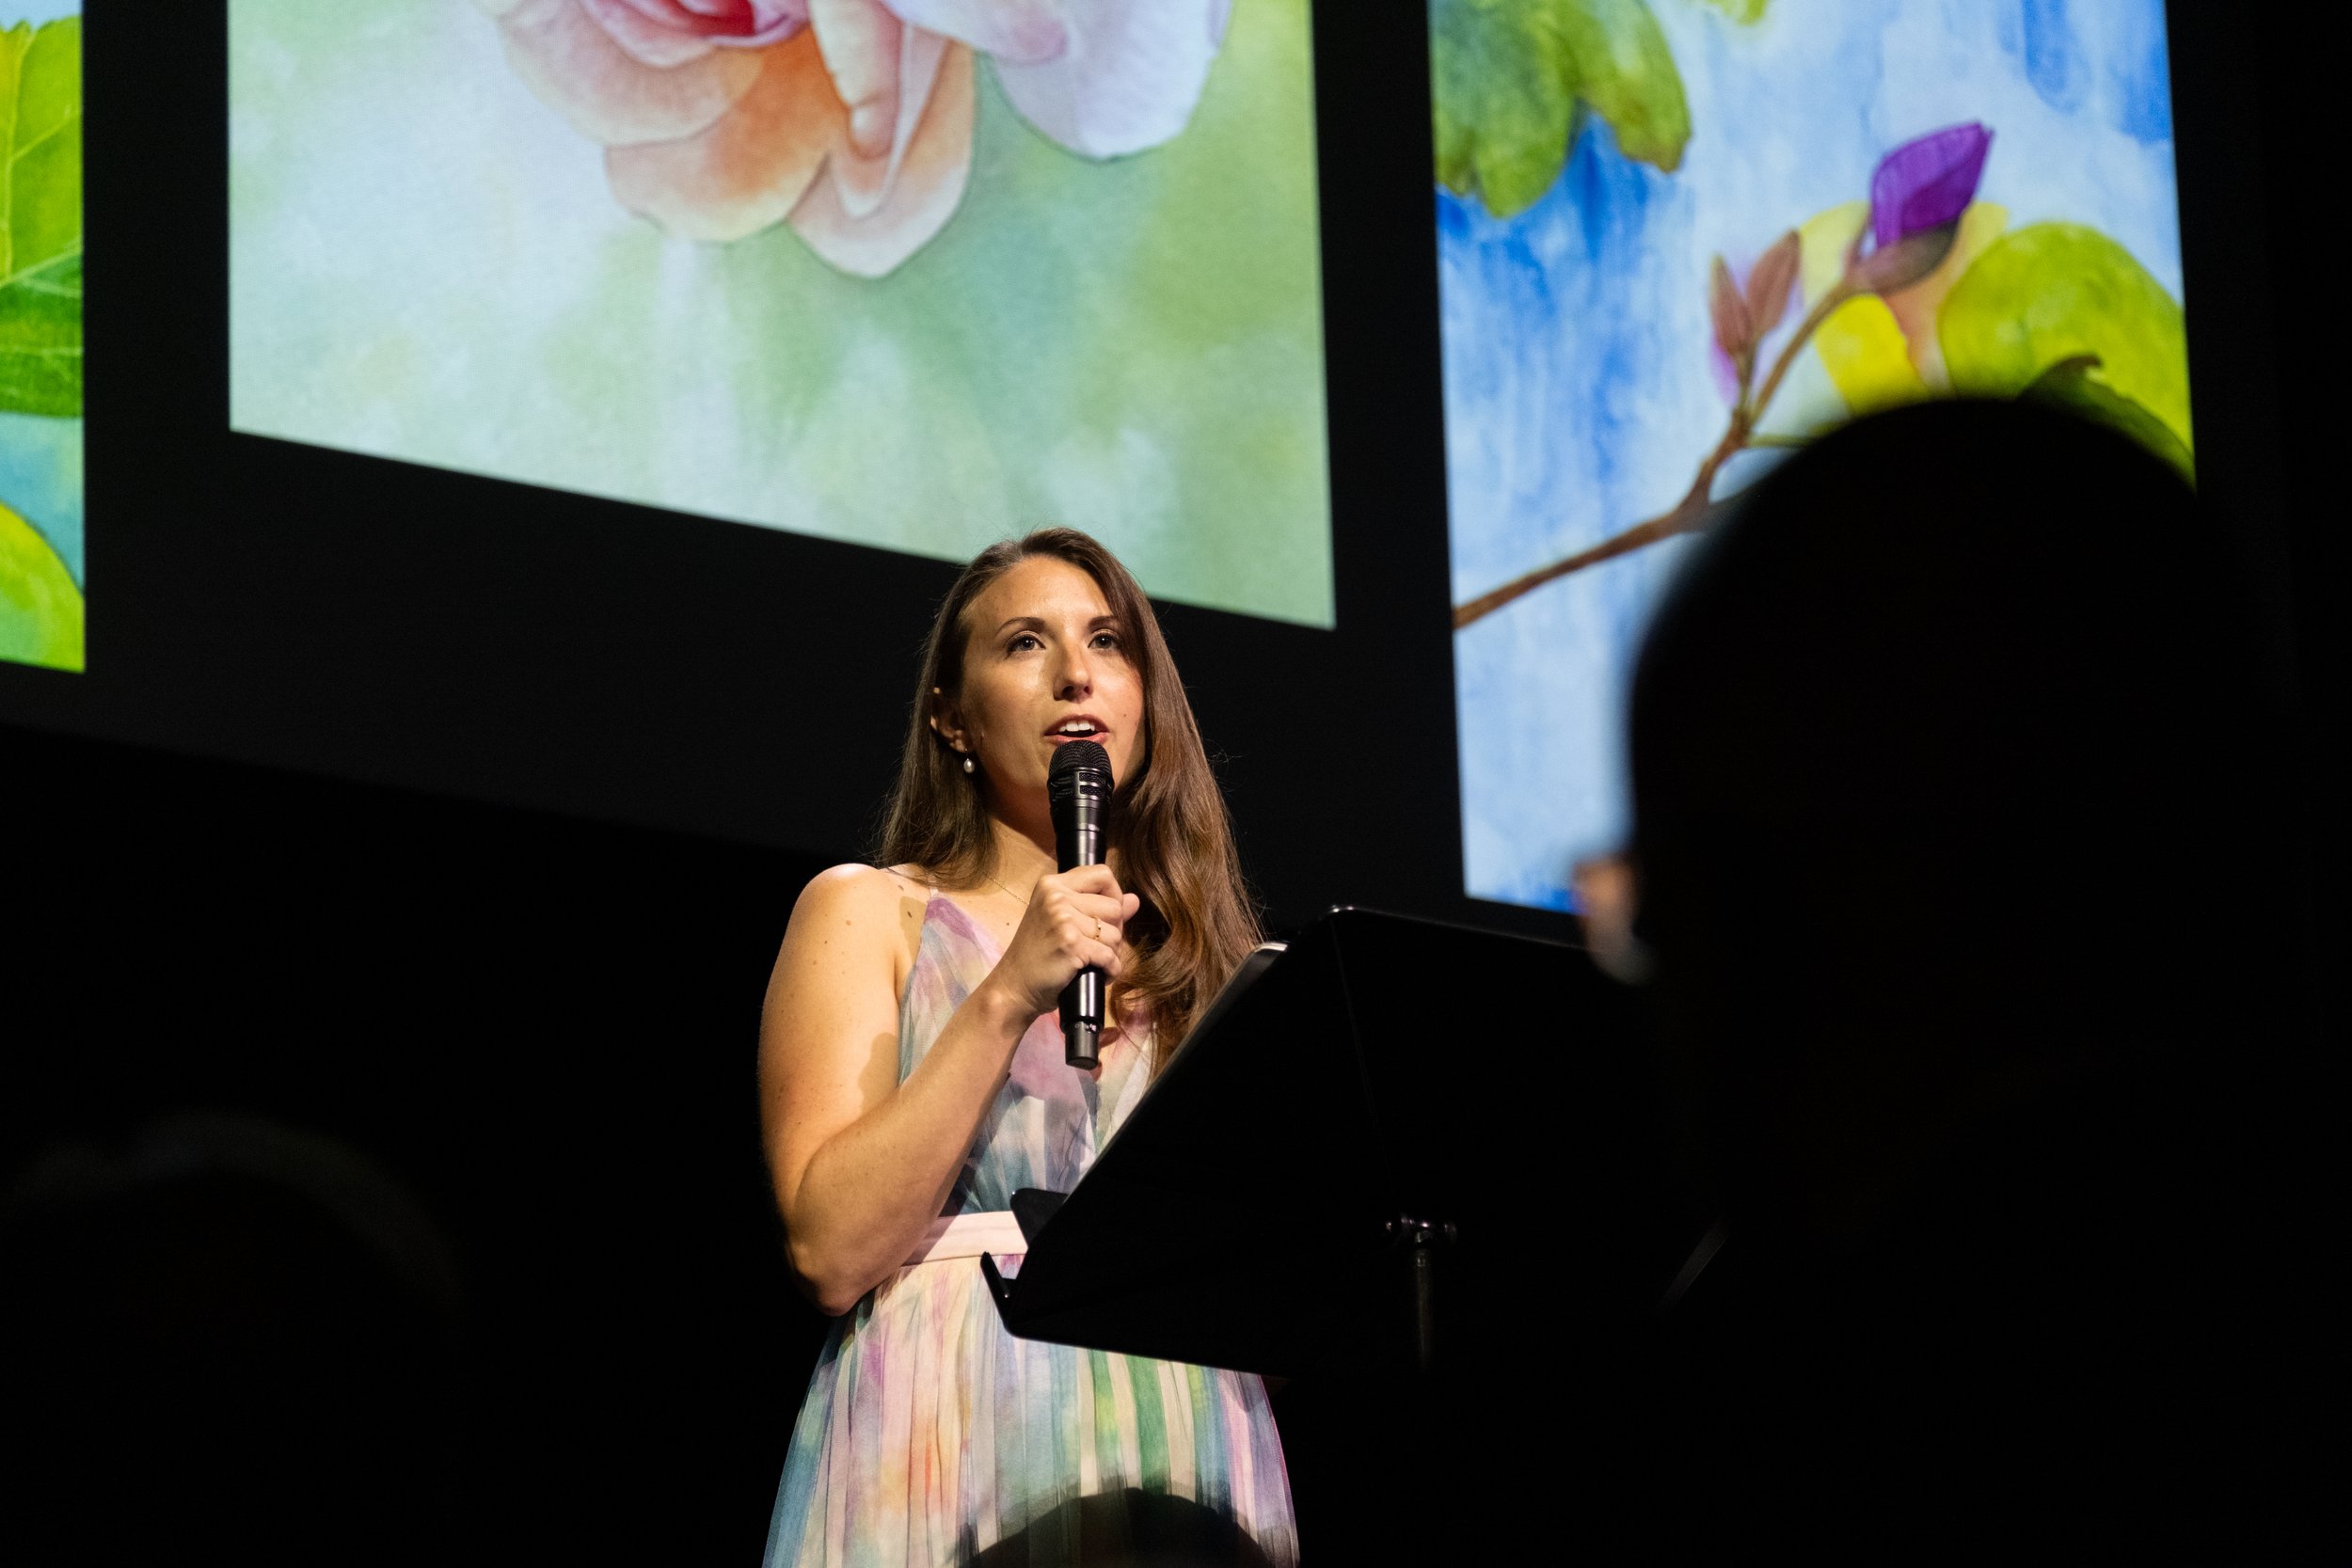  Painter Natalie Dourte presented “Vision in Bloom,” a collection of five watercolor paintings which reflect each of the months during the fellowship—January, February, March, April, and May—through stunning flowers.  